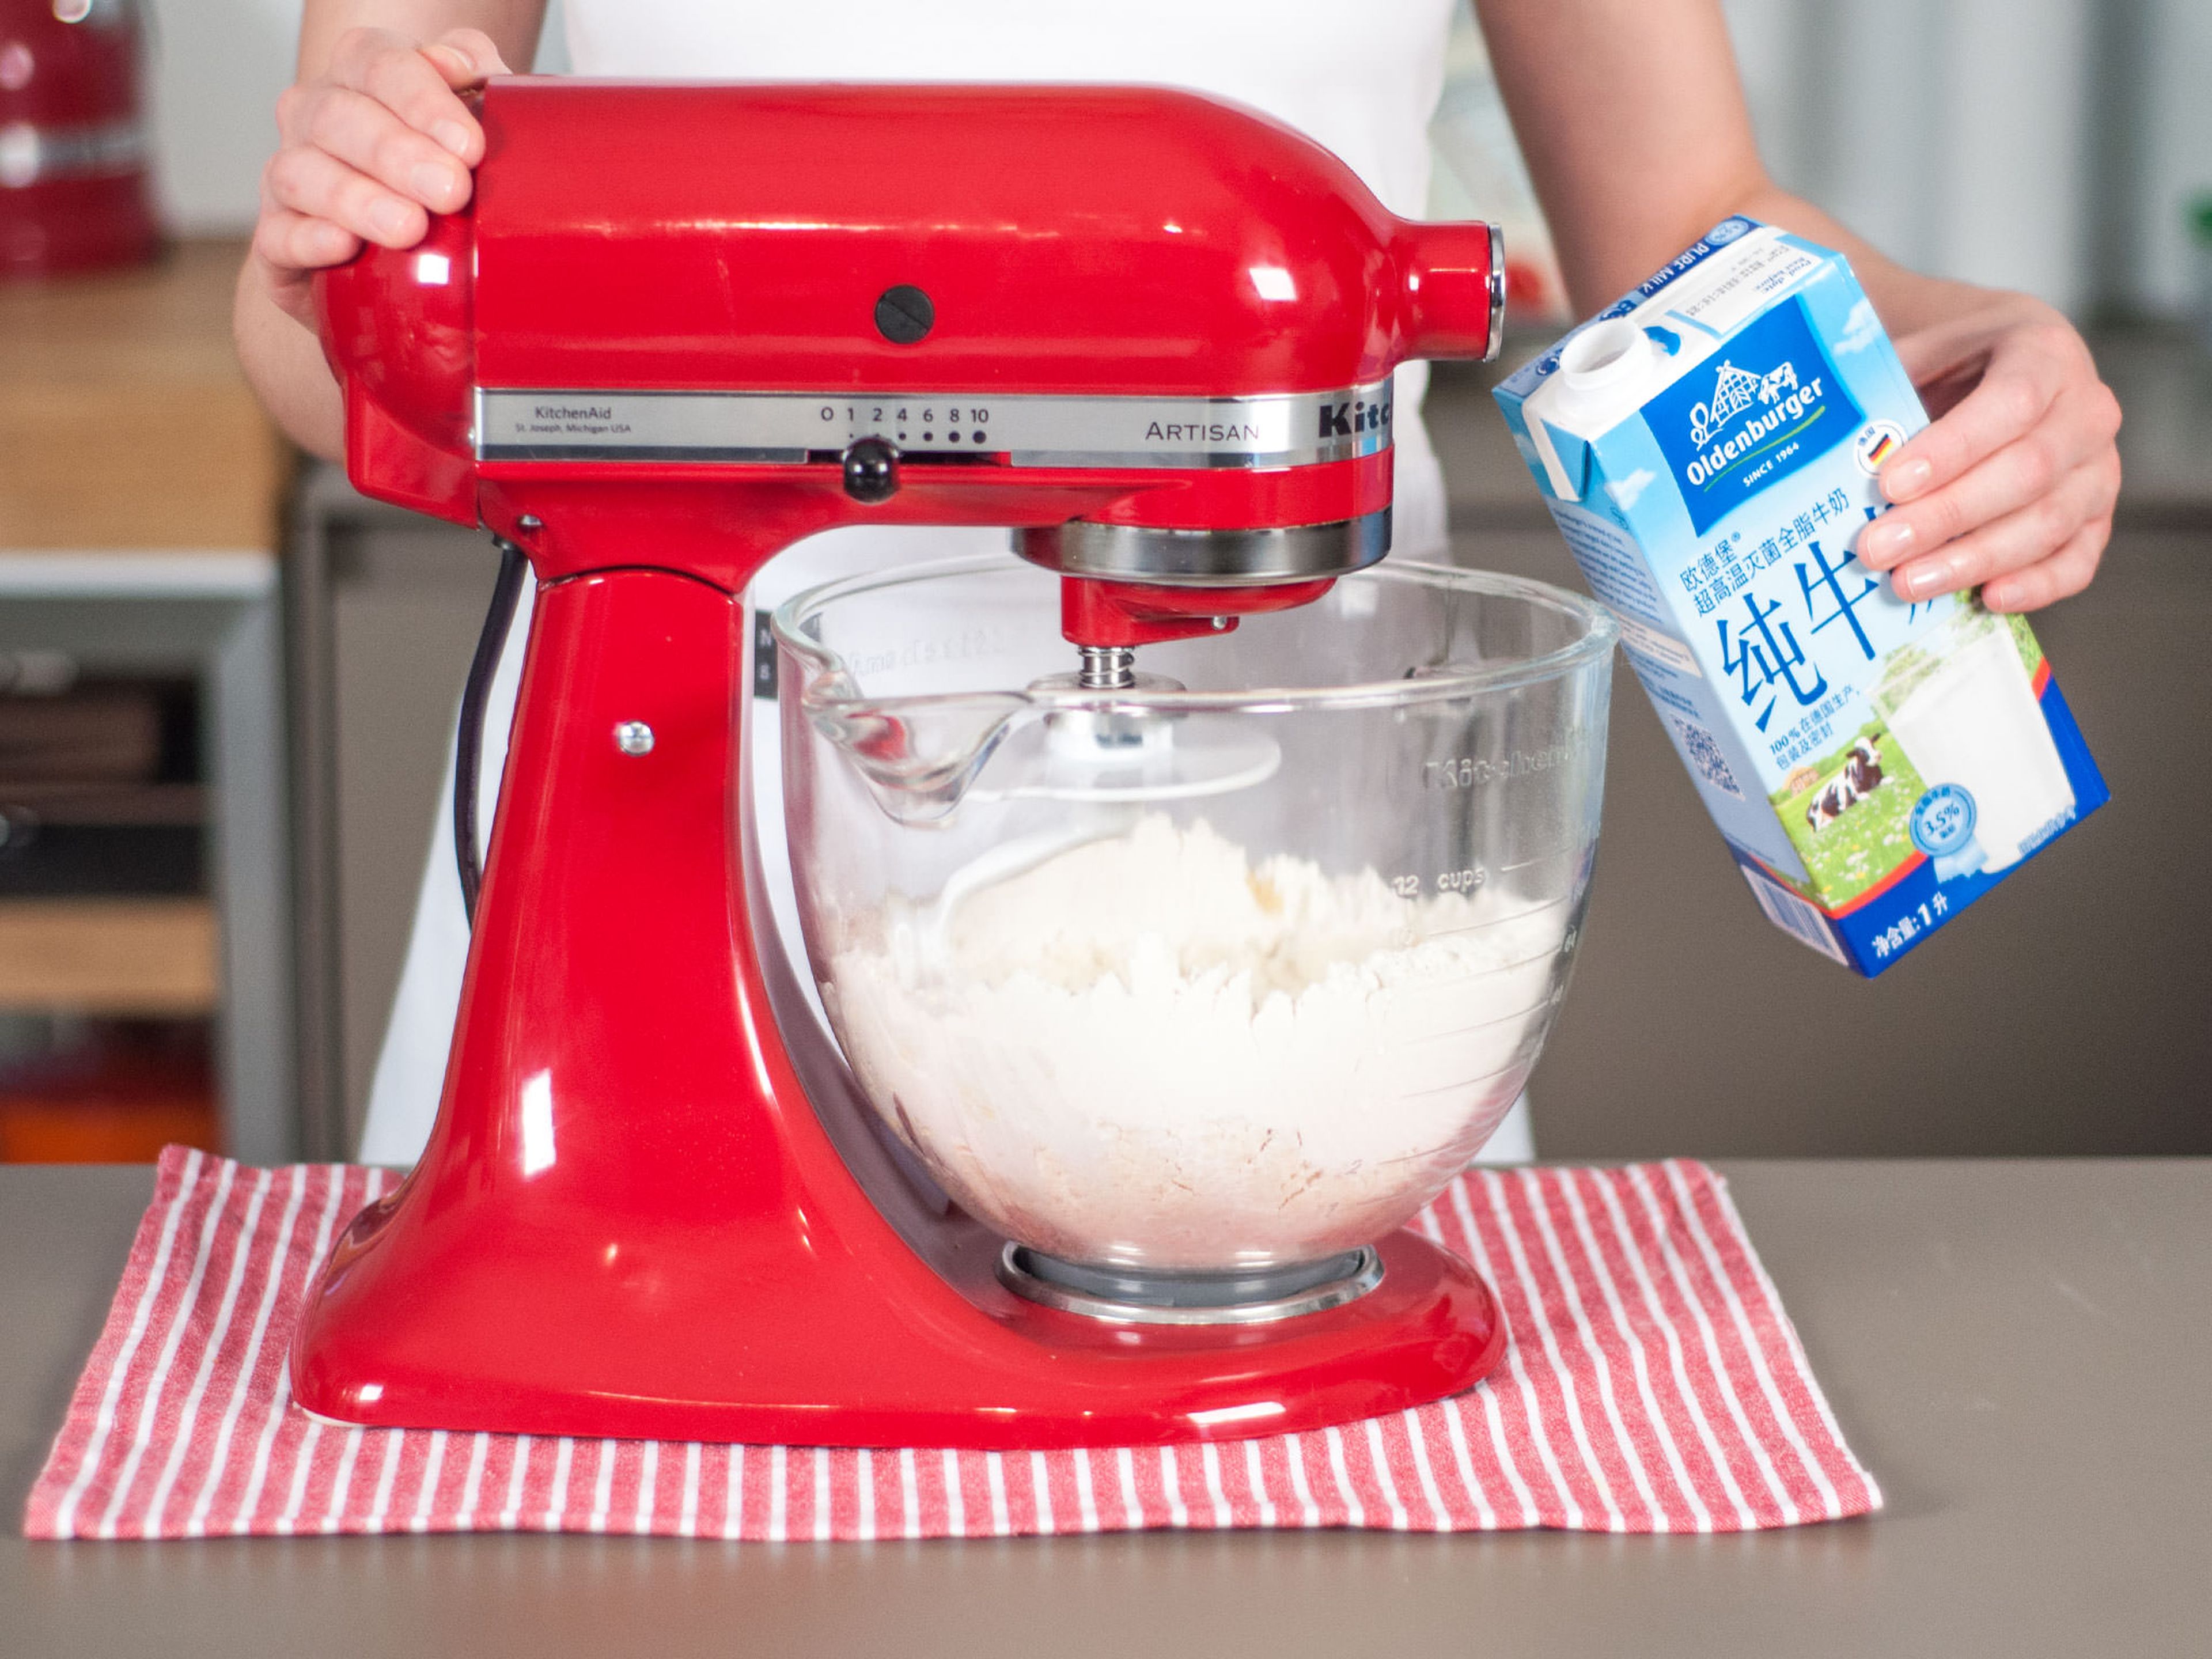 Combine flour, salt, and vegetable oil using a stand mixer with a dough hook. Gradually add milk and beat until incorporated. Continue to knead by hand until a smooth, elastic dough forms. Cover with plastic wrap, transfer to fridge, and allow to set for approx. 30 - 40 min.